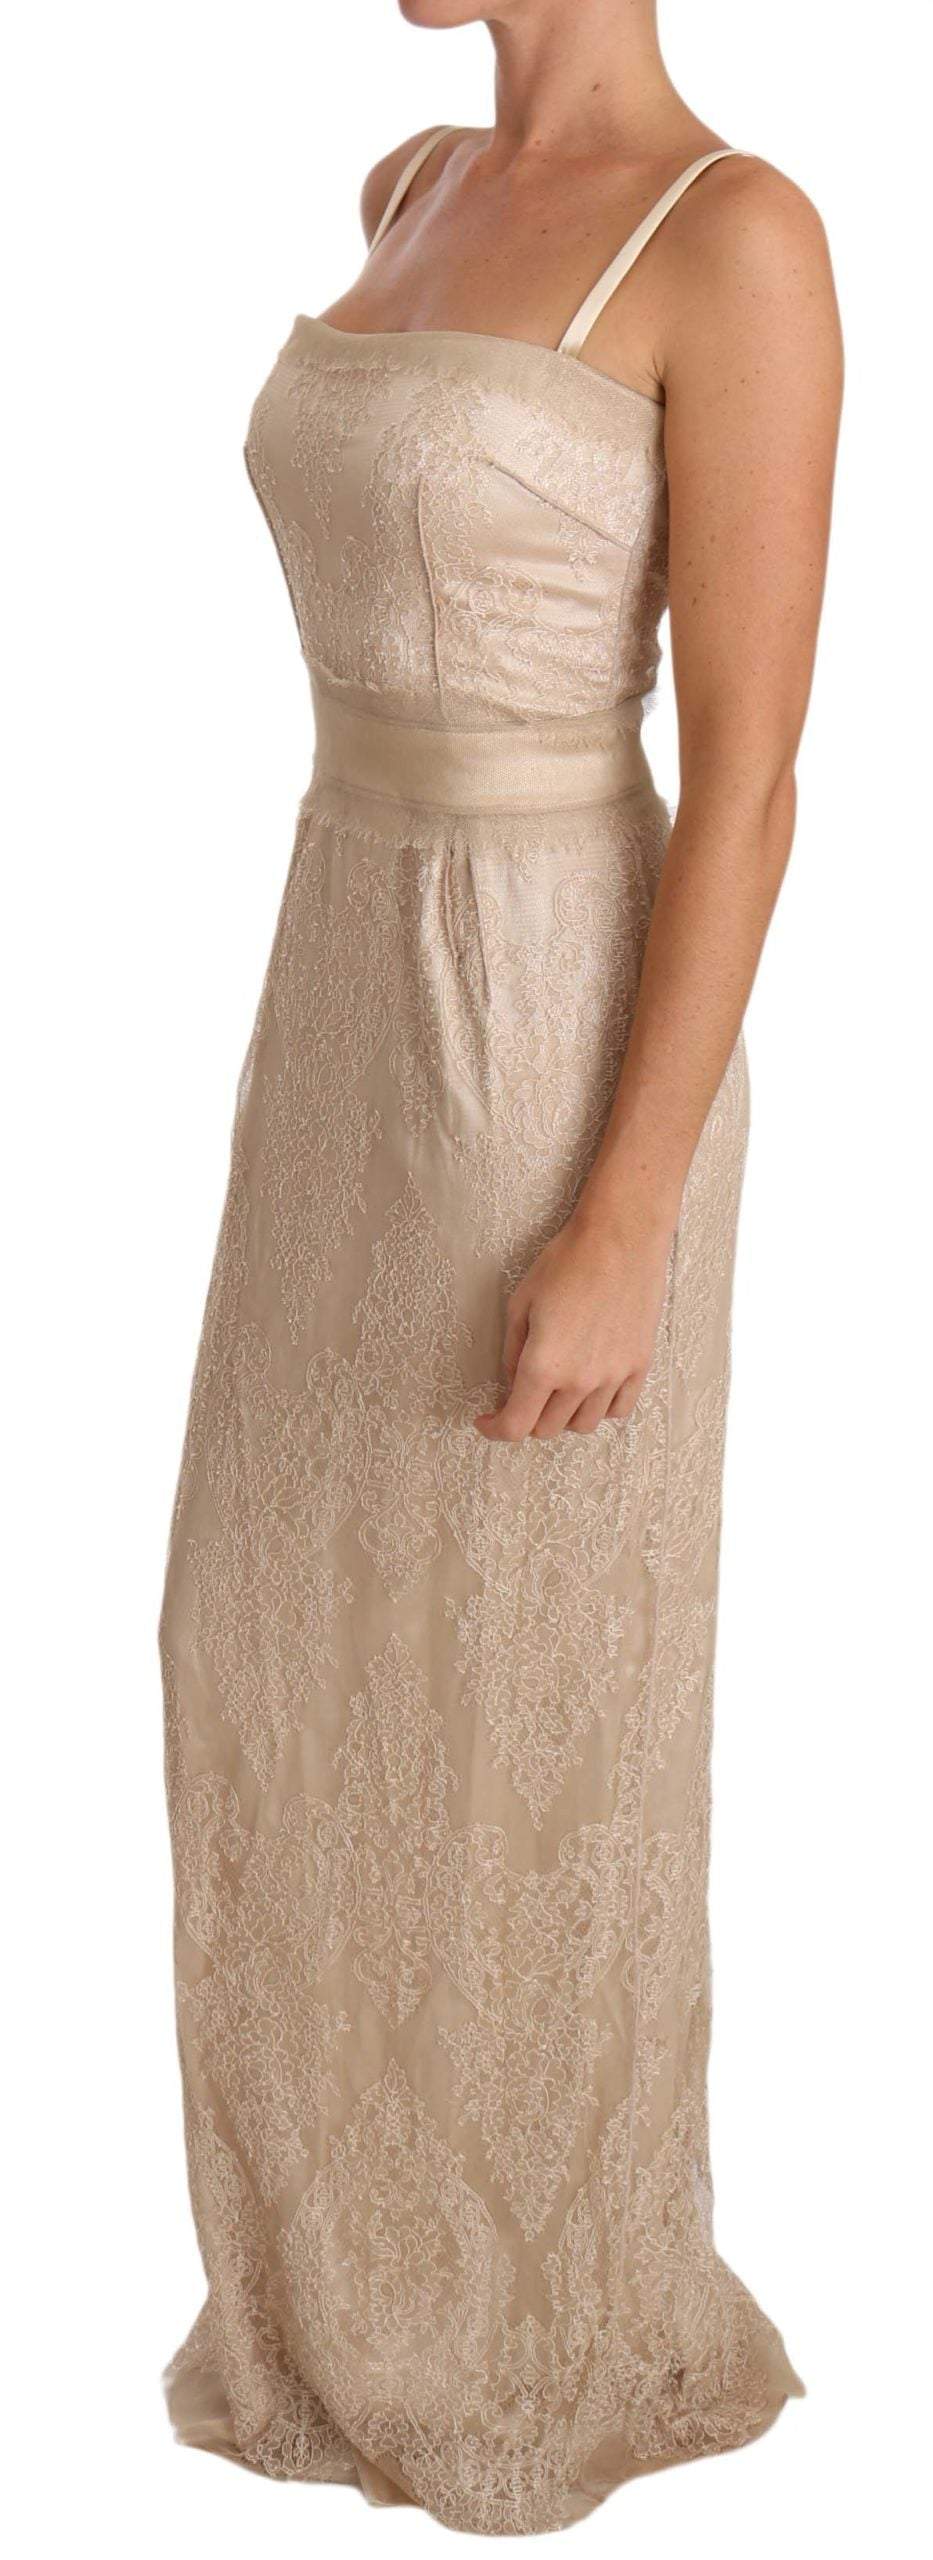 Dolce & Gabbana Beige Lace Spaghetti Strap Sheath Dress #women, Beige, Dolce & Gabbana, Dresses - Women - Clothing, feed-agegroup-adult, feed-color-Beige, feed-gender-female, IT42|M, Women - New Arrivals at SEYMAYKA